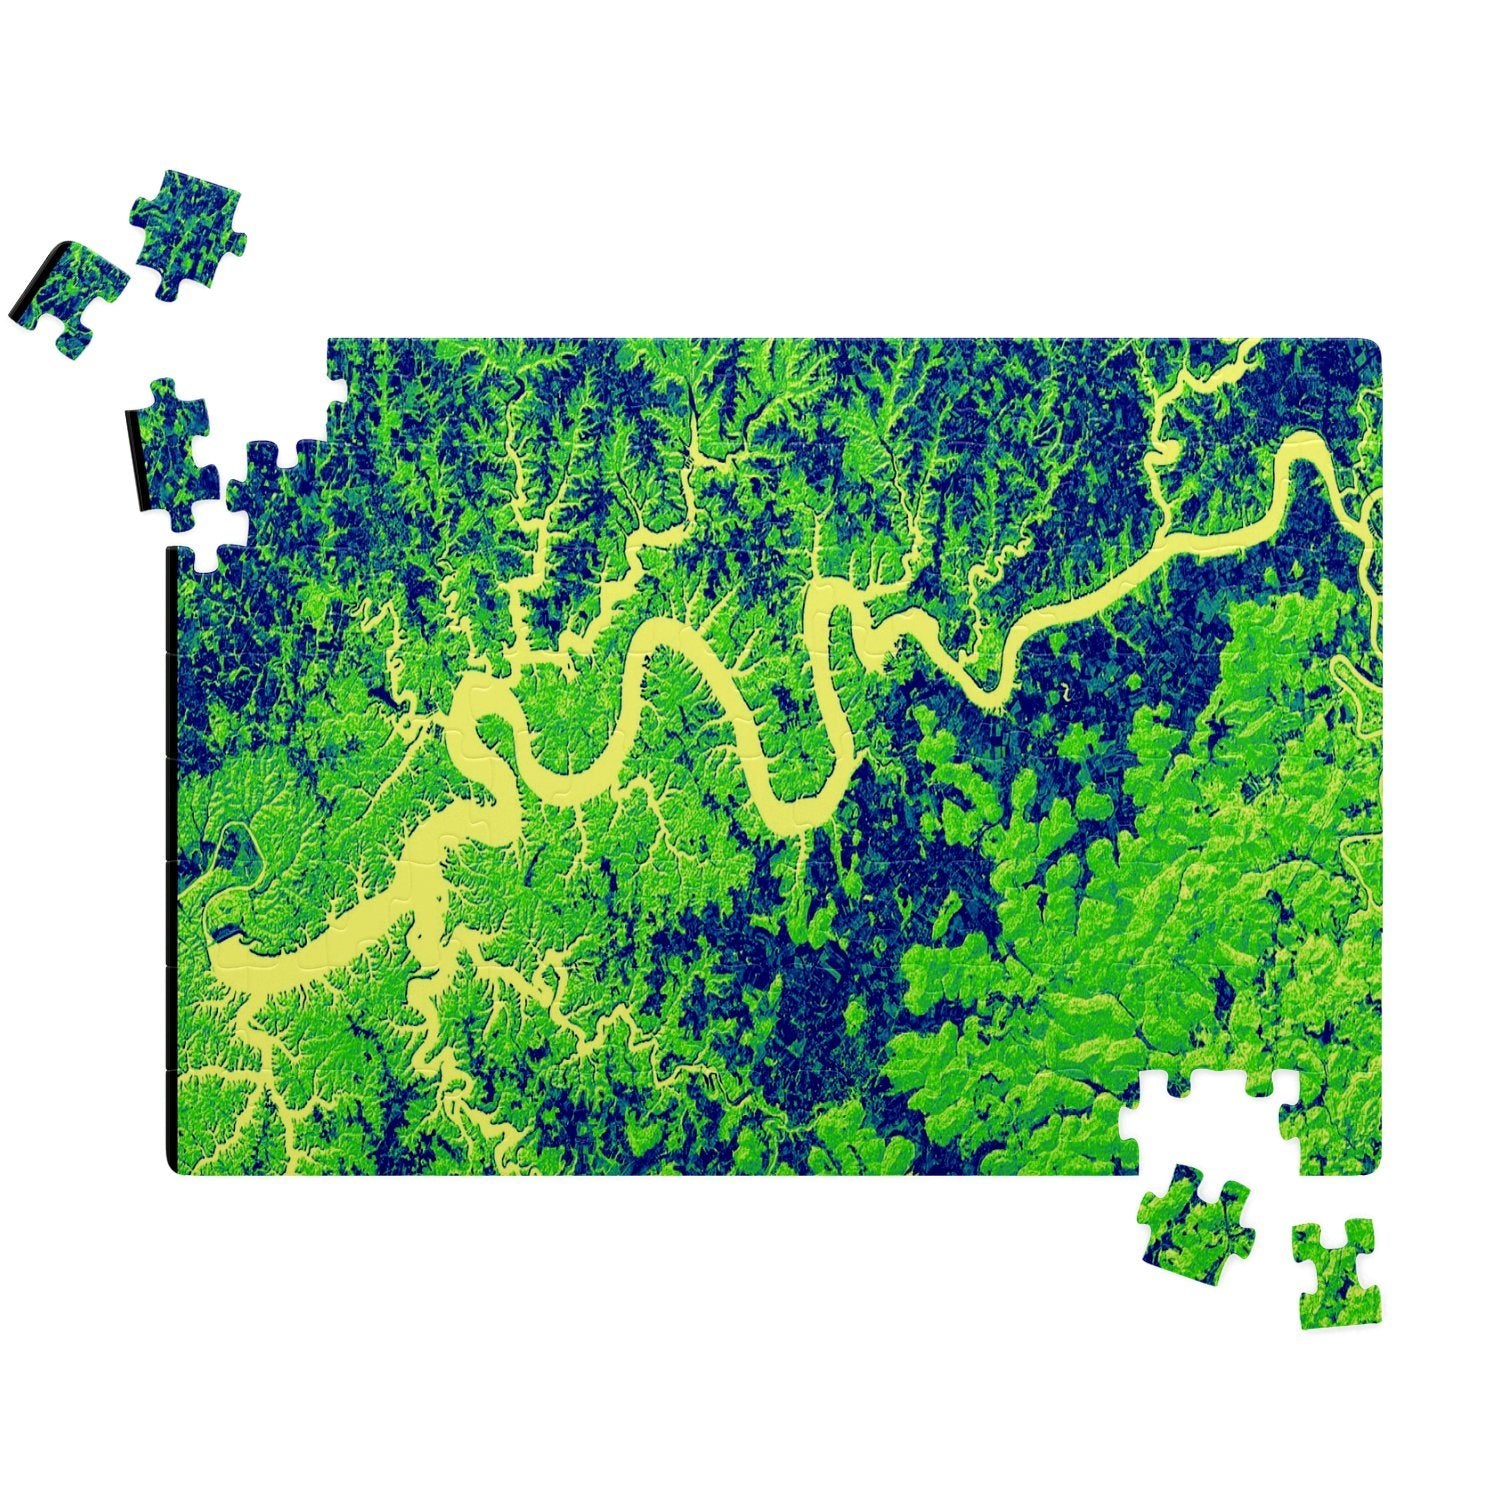 Lake Cumberland From Space - Green jigsaw puzzle Jigsaw Puzzle - AOP 120pcs - 11.5" x 8" / 29.3cm x 20.3cm 